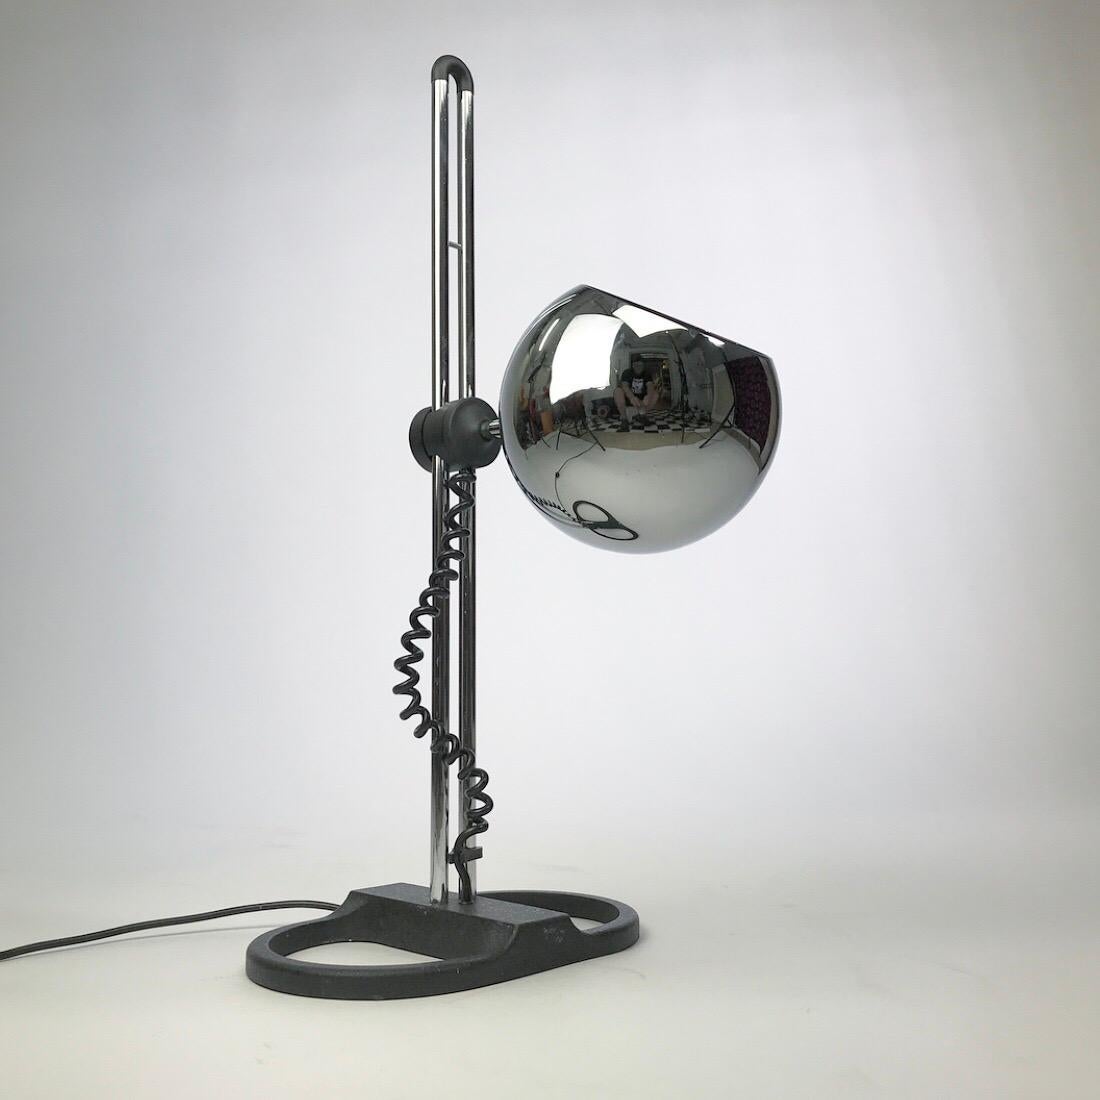 Rare Space Age chrome table lamp by Staff Leuchten, Germany 1970s.

Twist it, slide it and turn it. This cool chrome light has so many different positions / setting.

The renowned manufacture Staff Leuchten is all about cool designs and high end